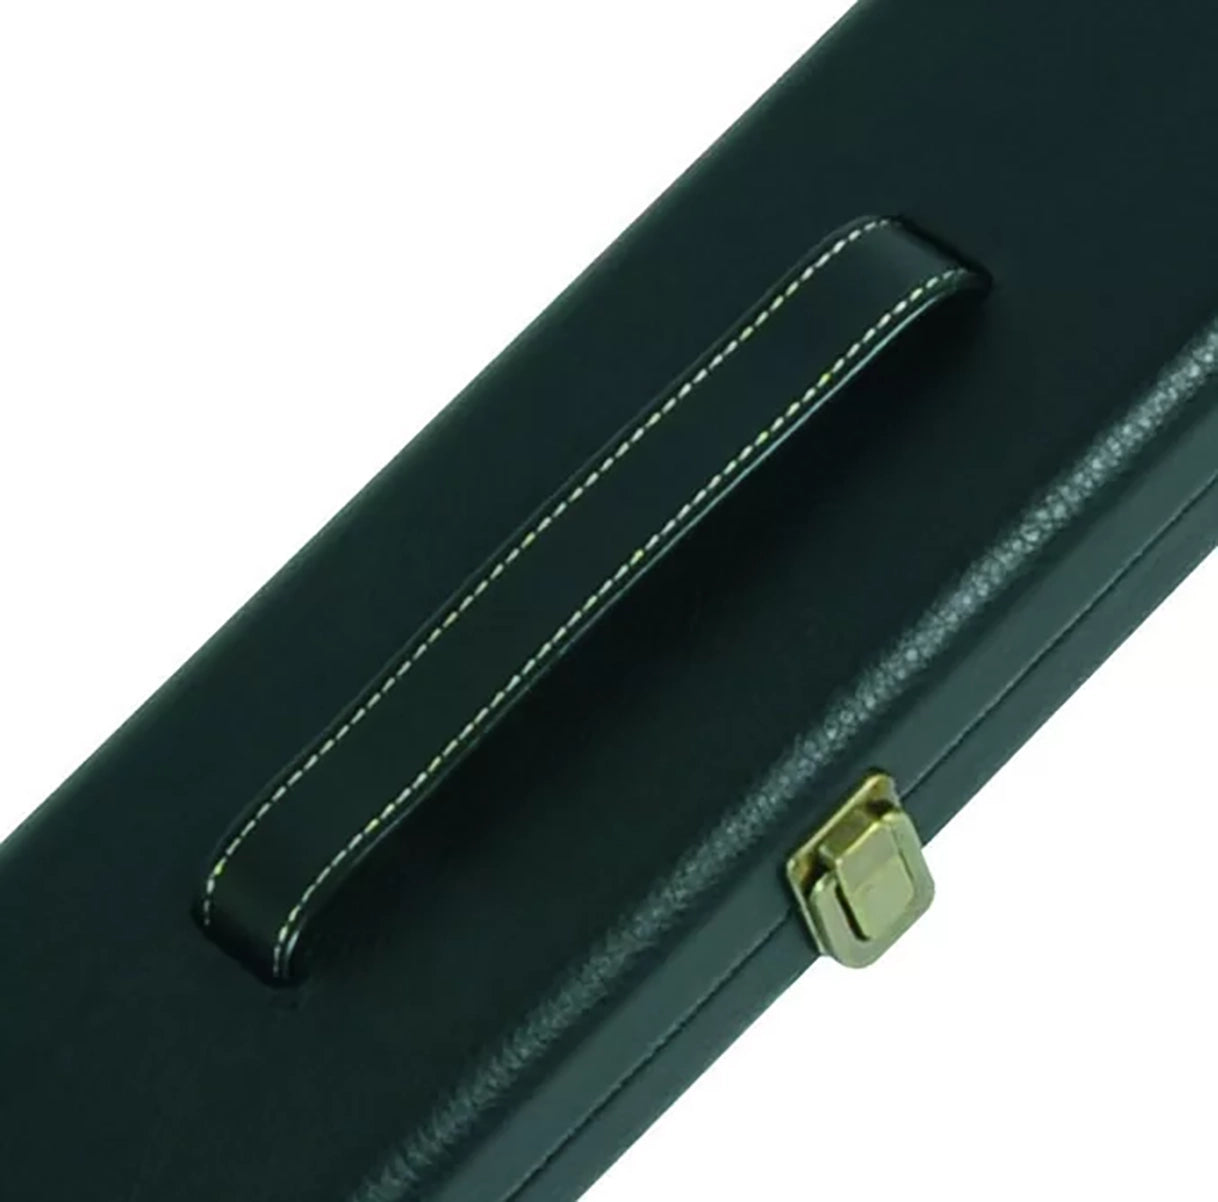 Peradon Black Leather Look 3/4 Jointed Cue Case. Close up view